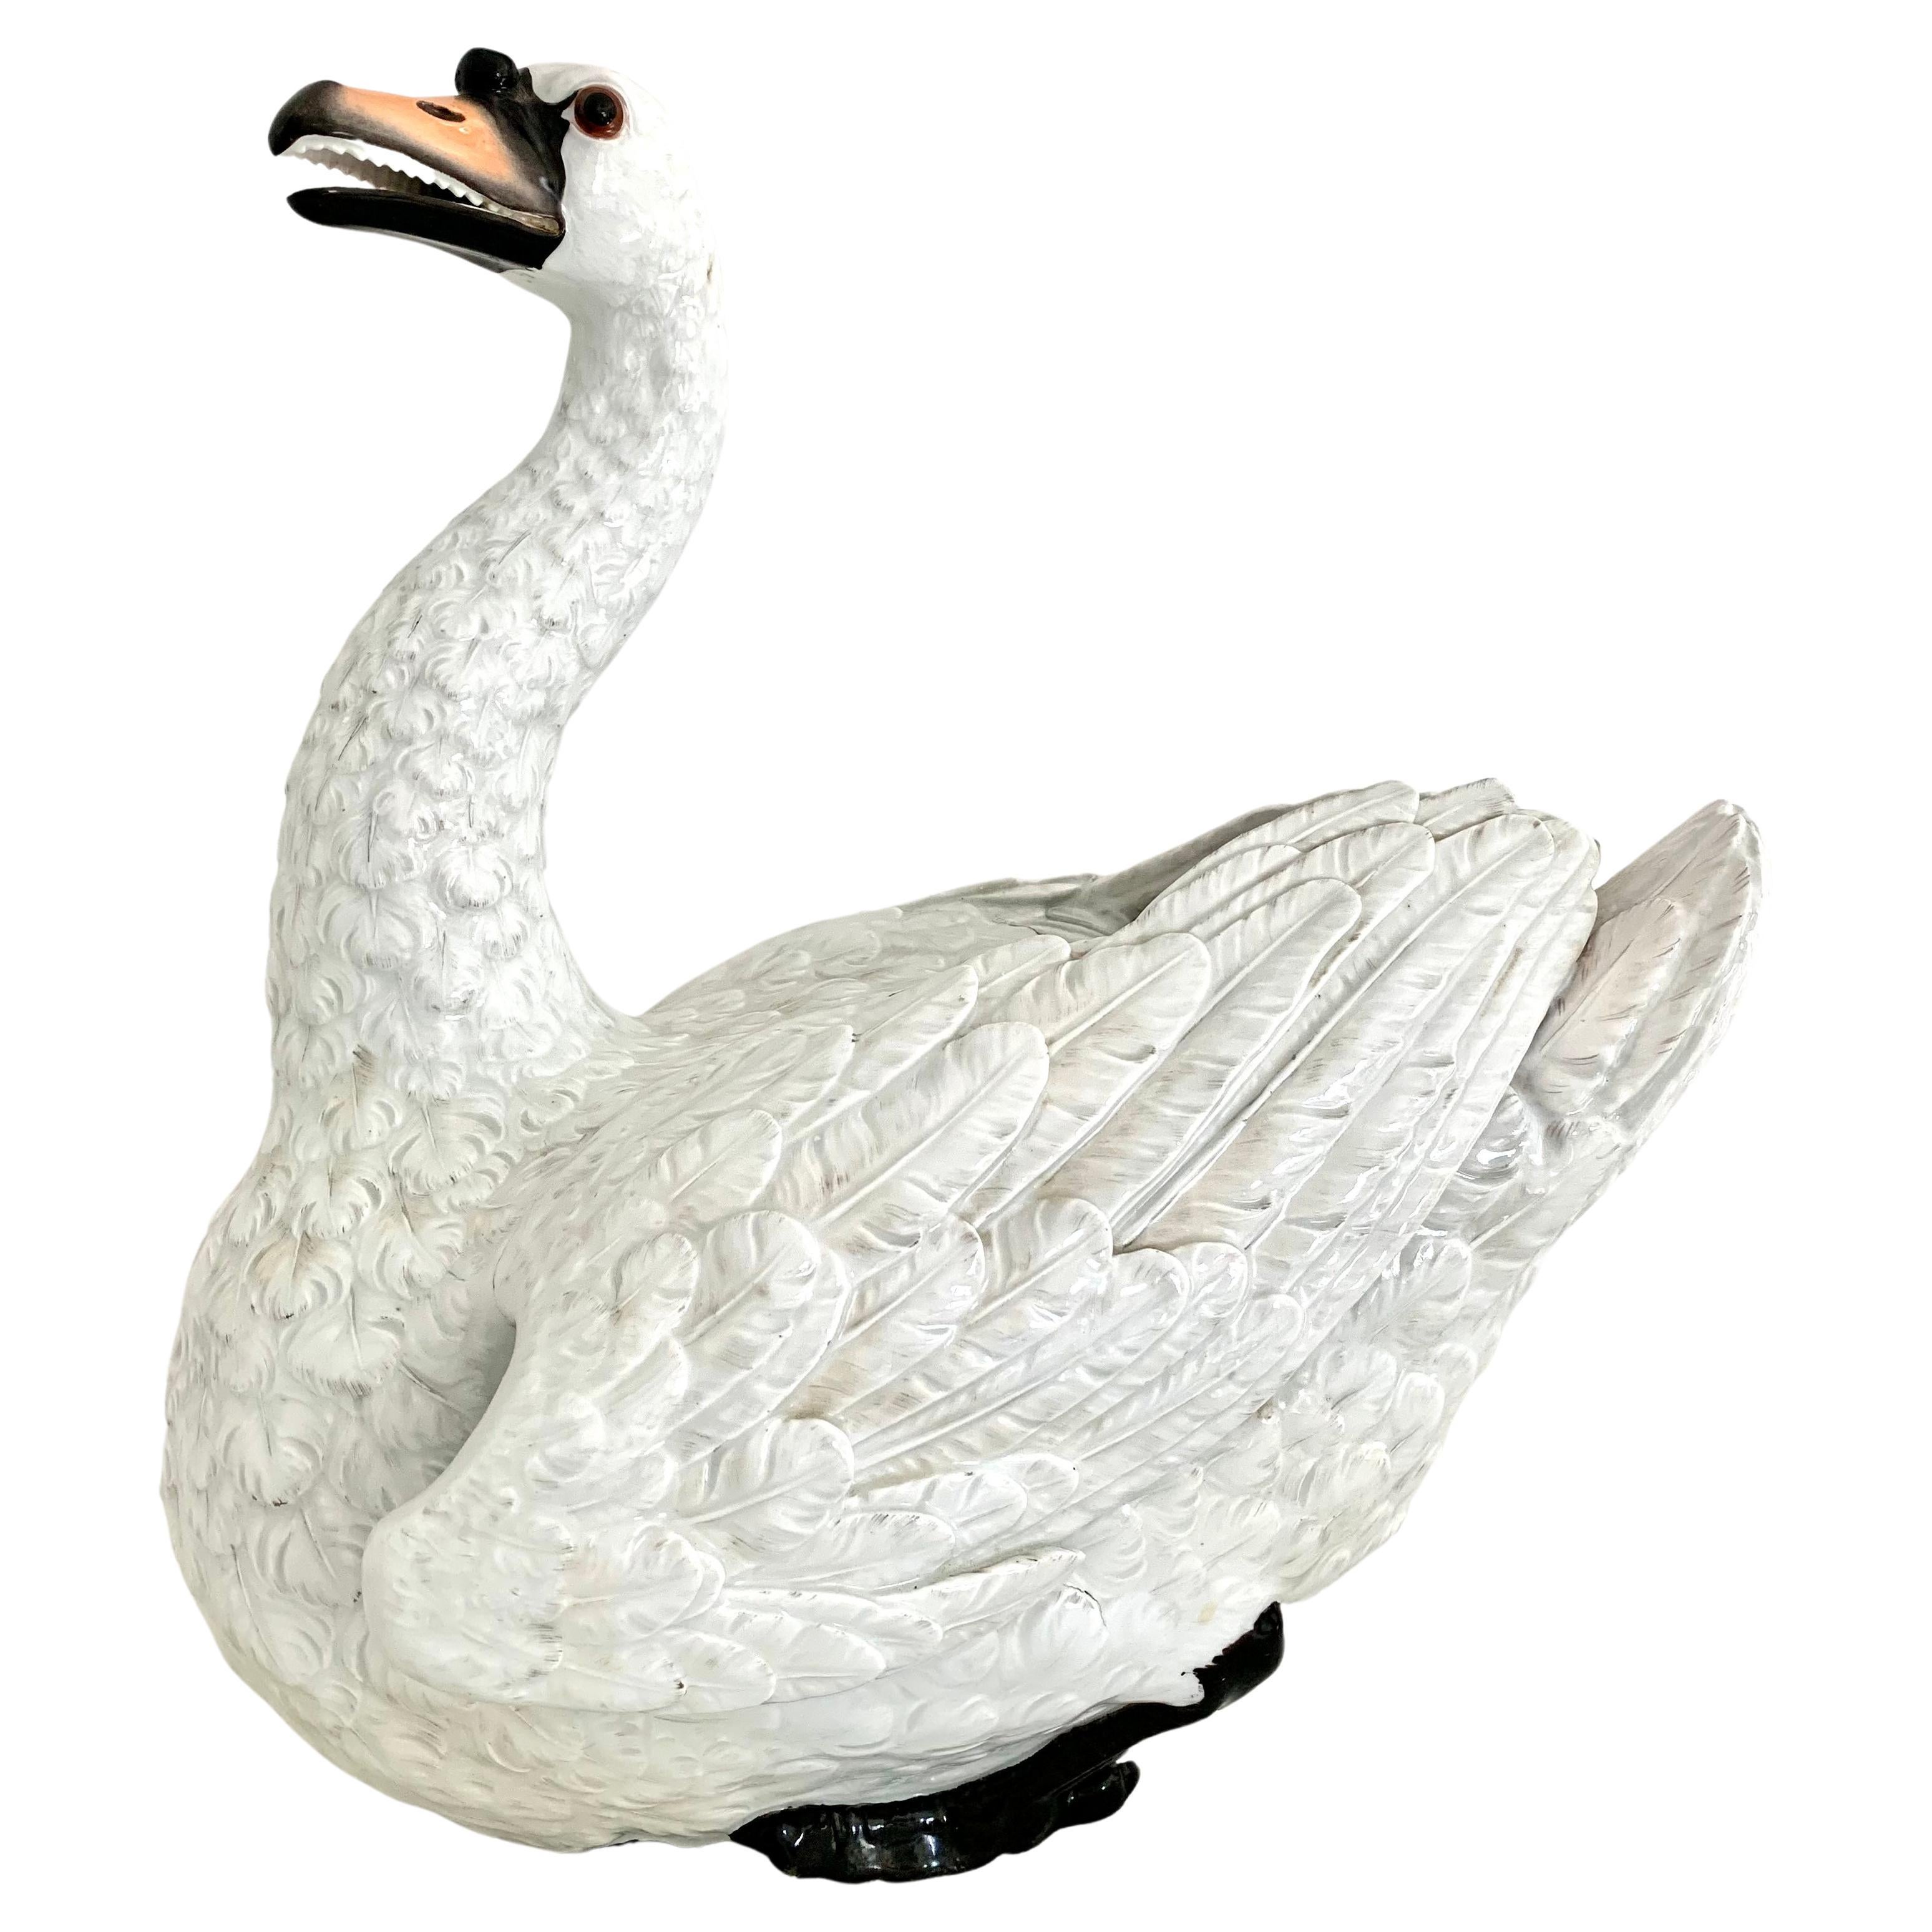 Fine Large Late 18th - Early 19th Century Meissen Porcelain Model of a Swan